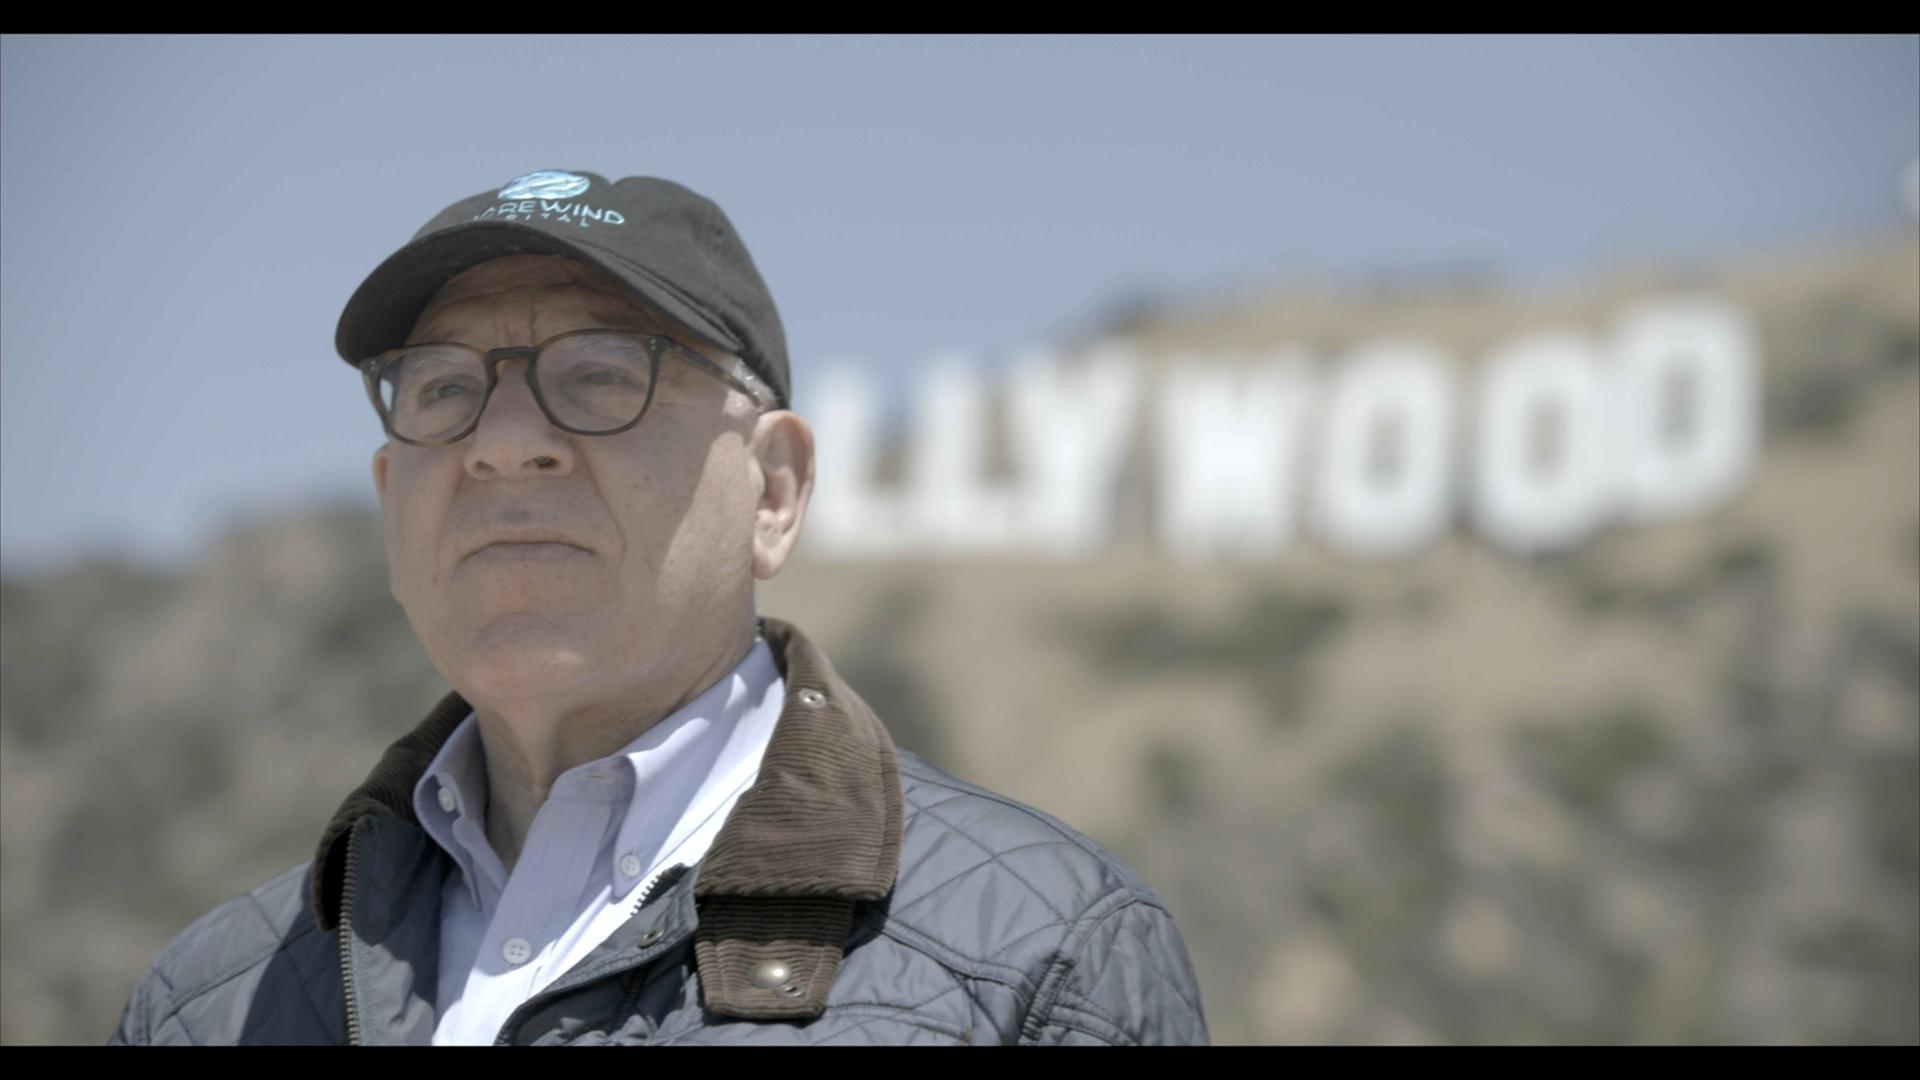 David Rubenstein stands with the Hollywood Sign in the background.